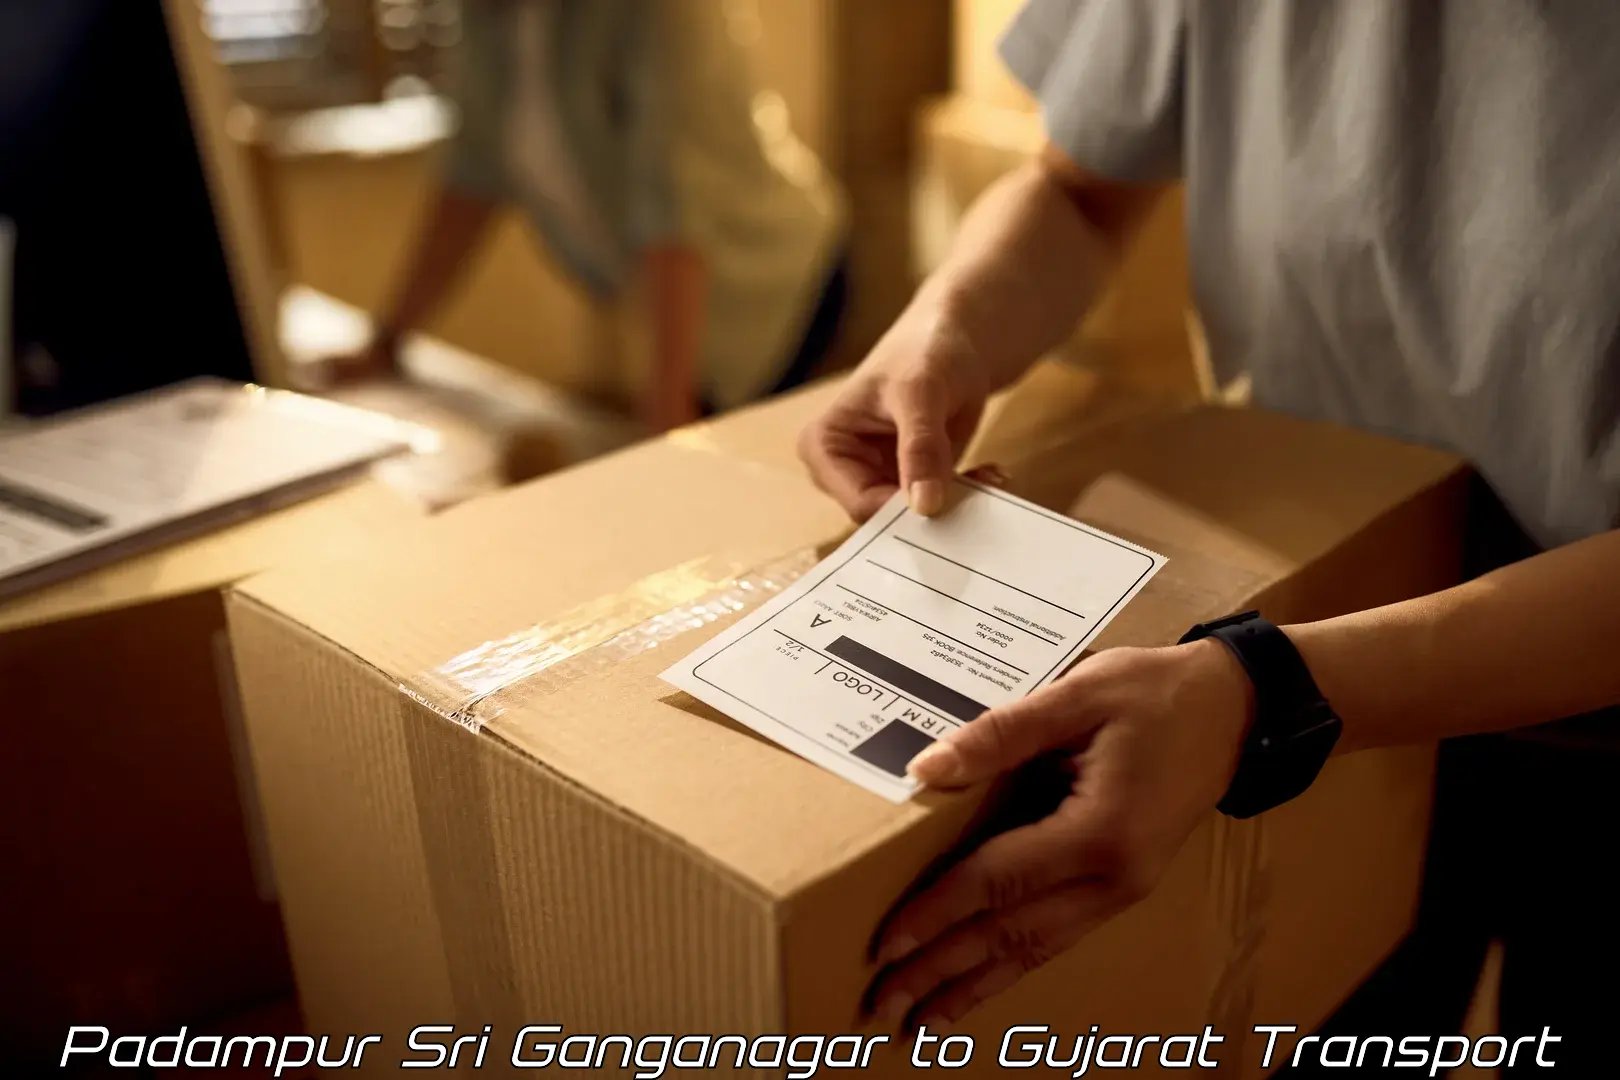 Package delivery services Padampur Sri Ganganagar to Sihor